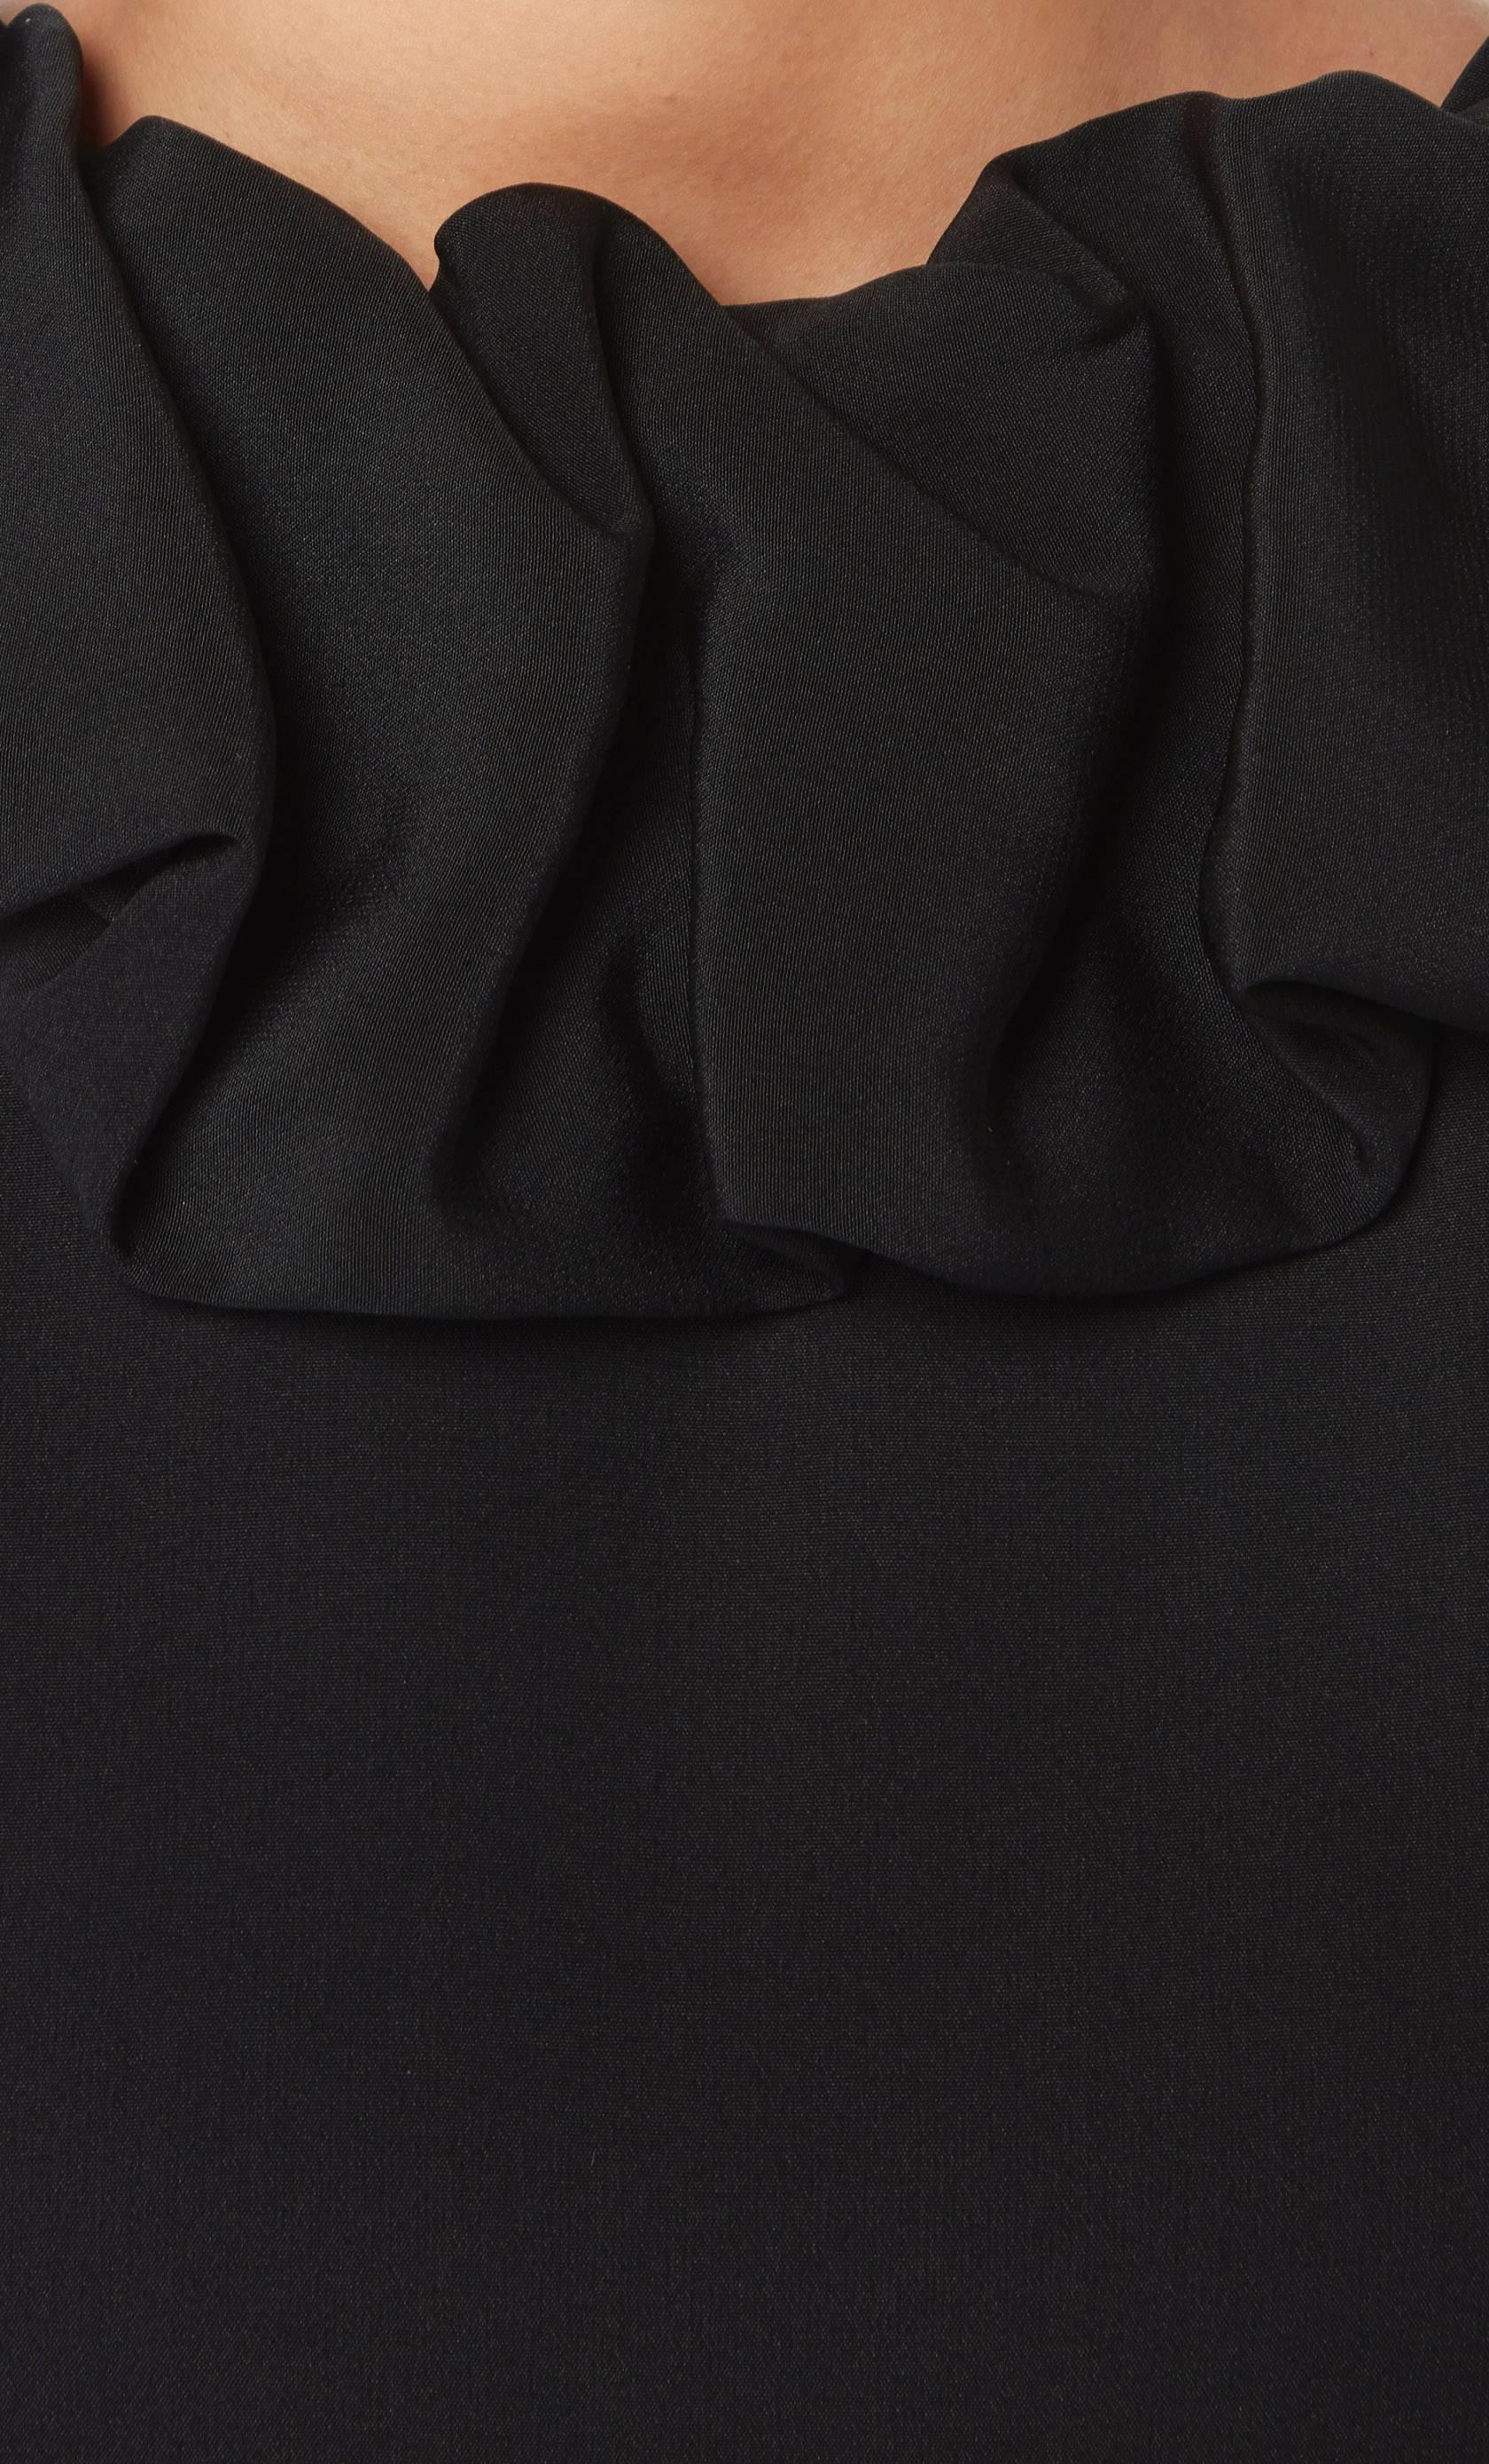 Dior black dress, circa 1964 In Excellent Condition For Sale In London, GB